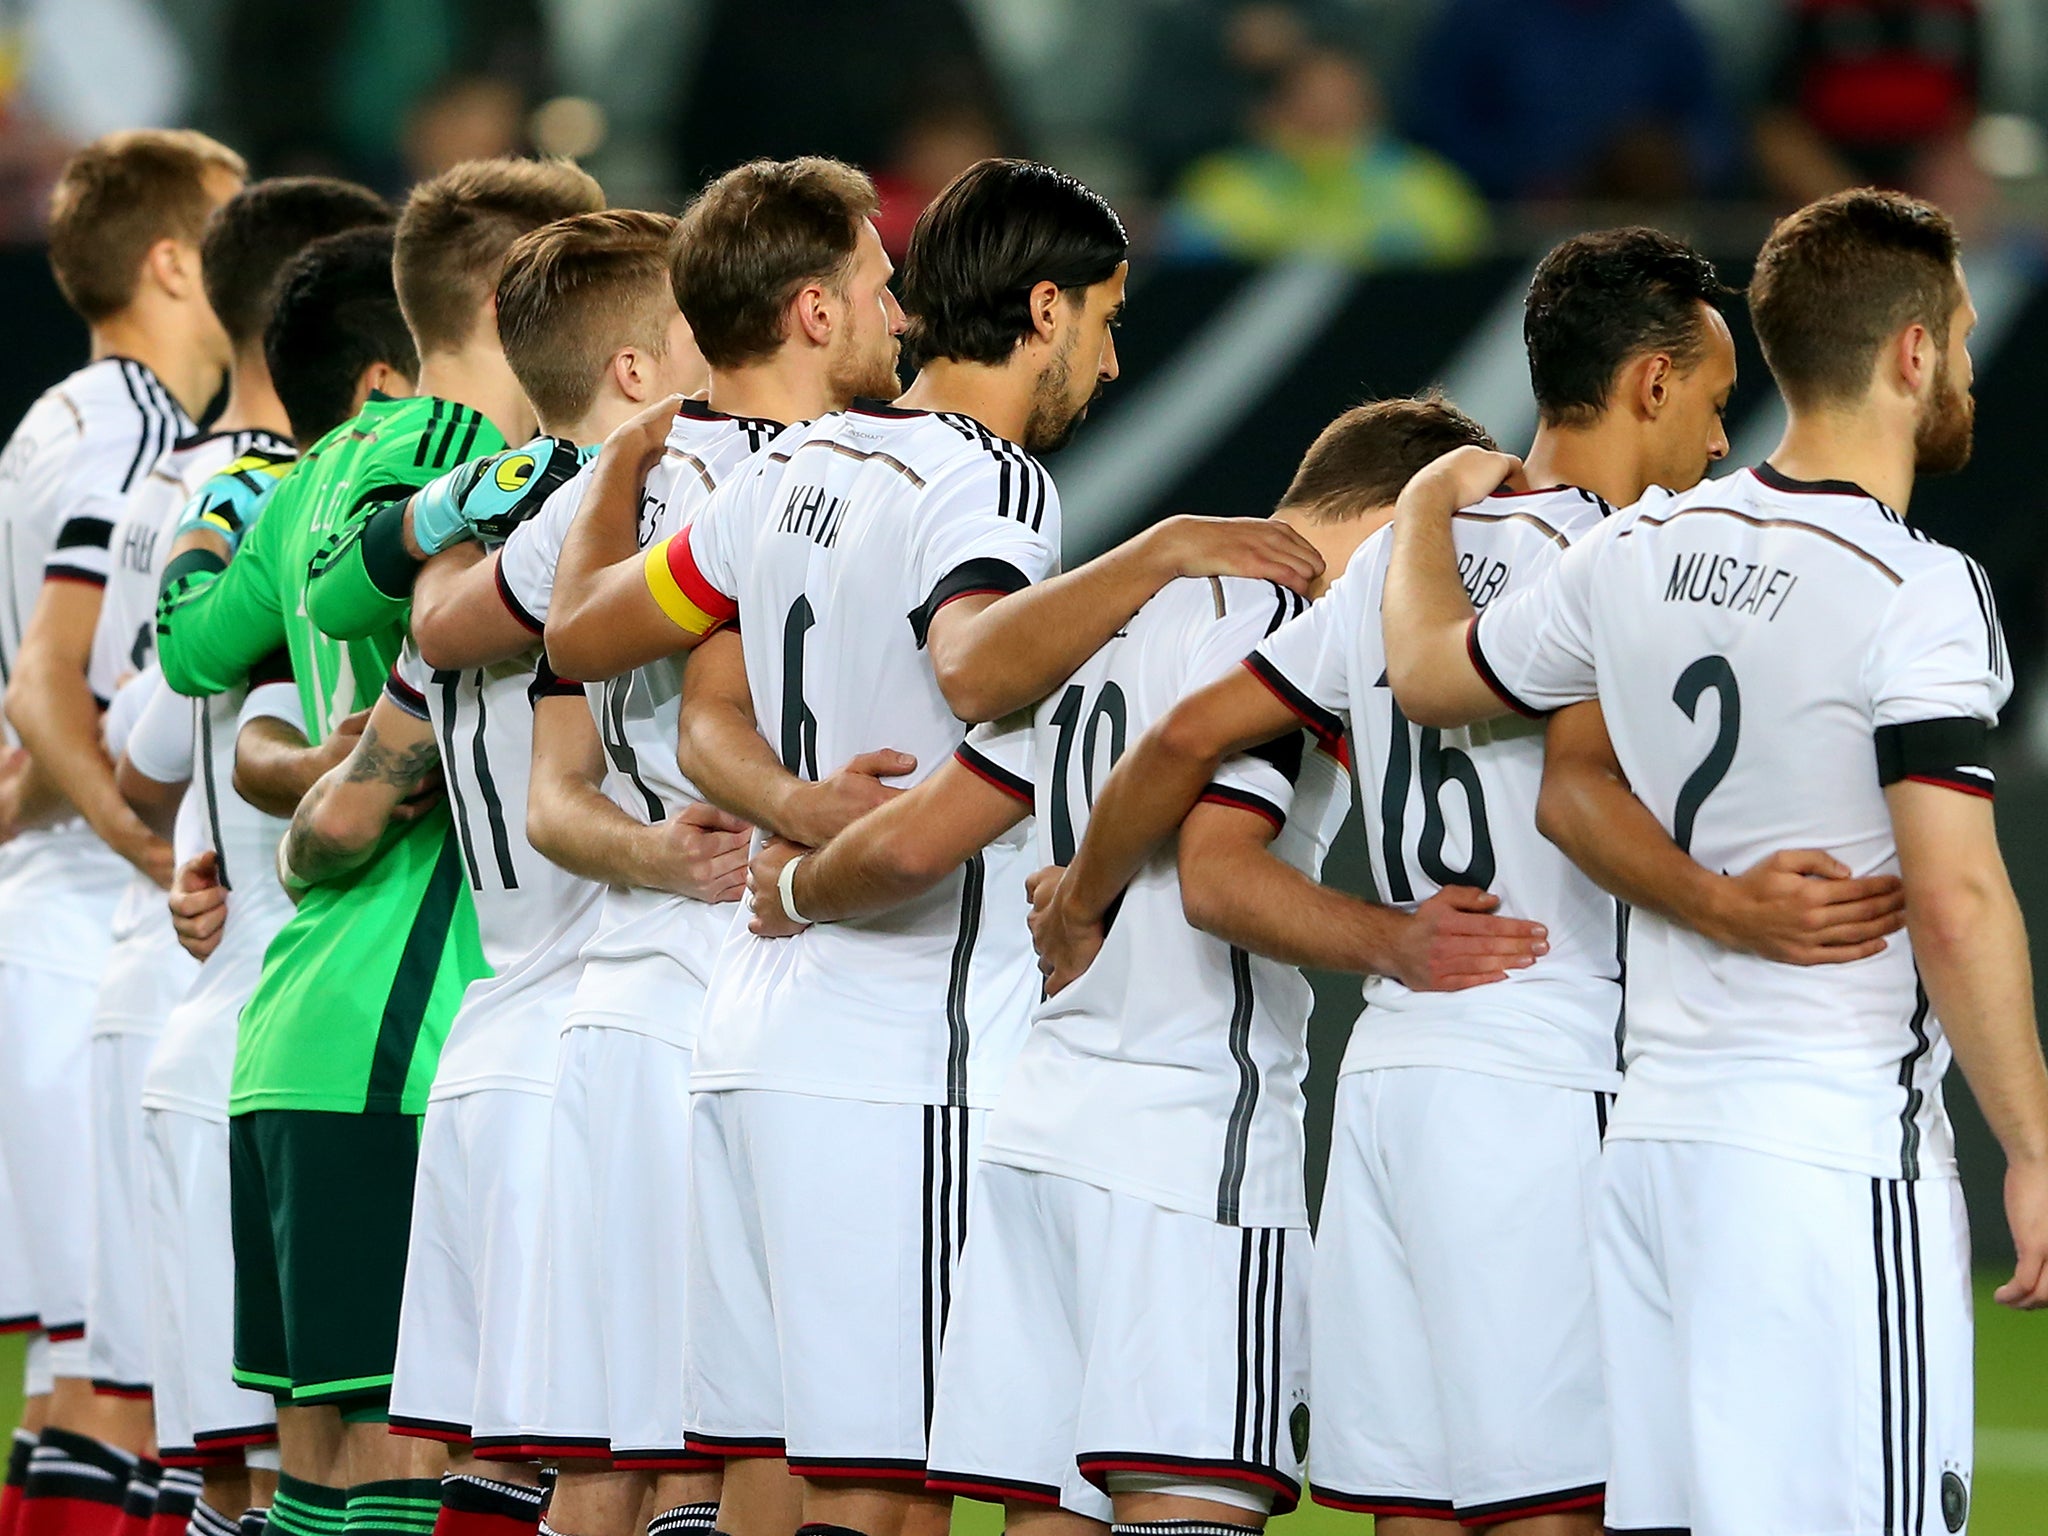 The German side stand in silence in tribute to the Germanwings victims